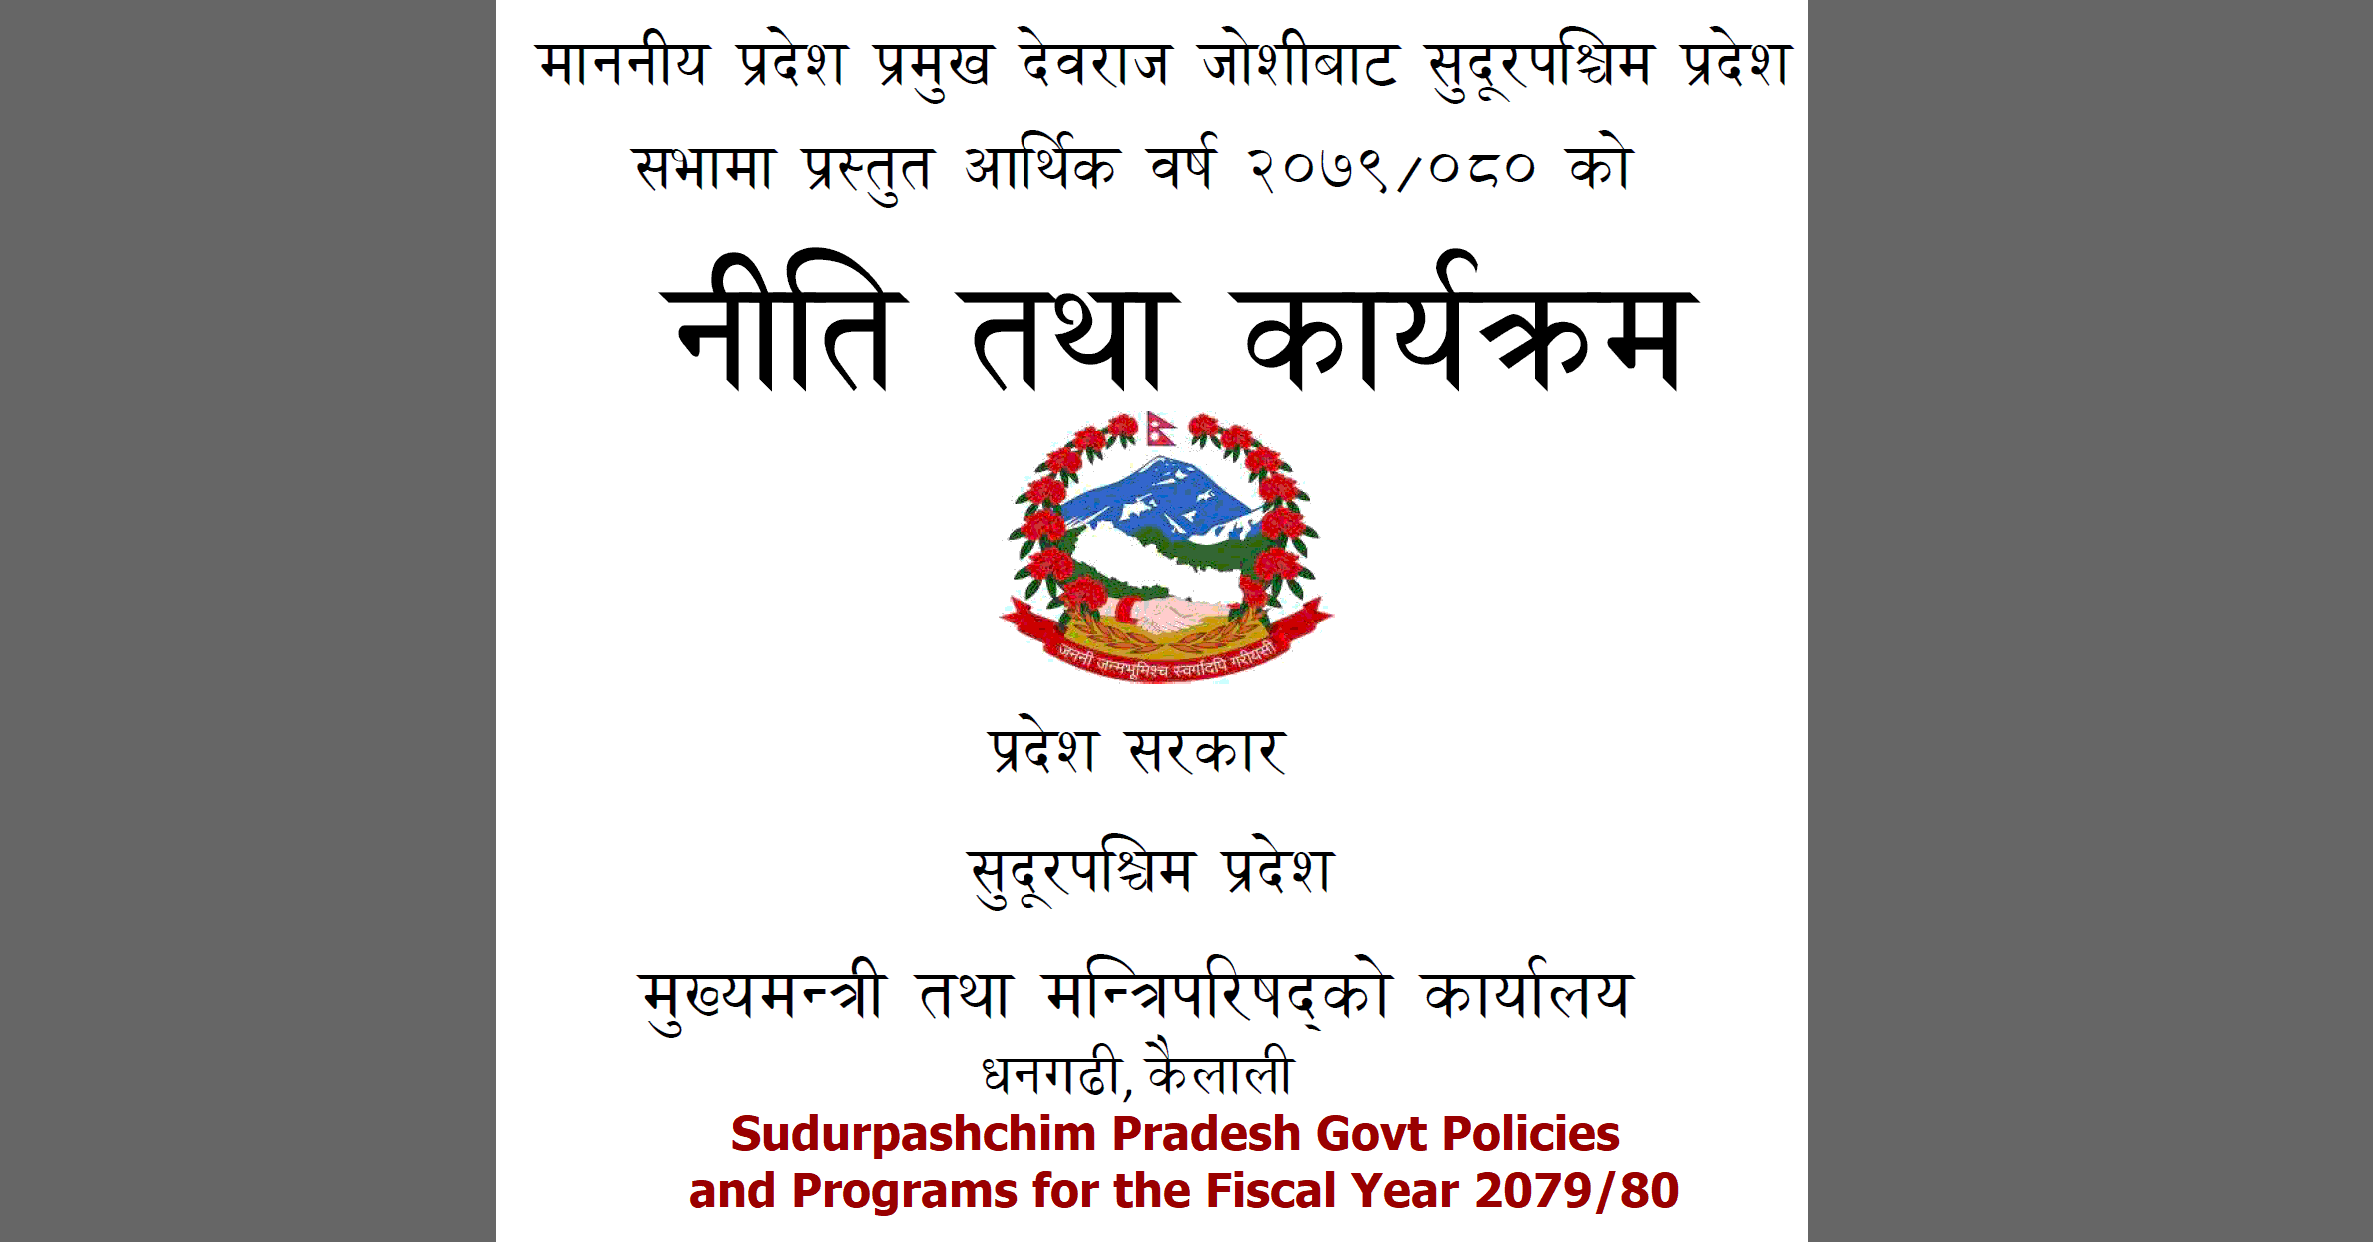 Sudurpashchim Pradesh Govt Policies and Programs for the Fiscal Year 2079-80